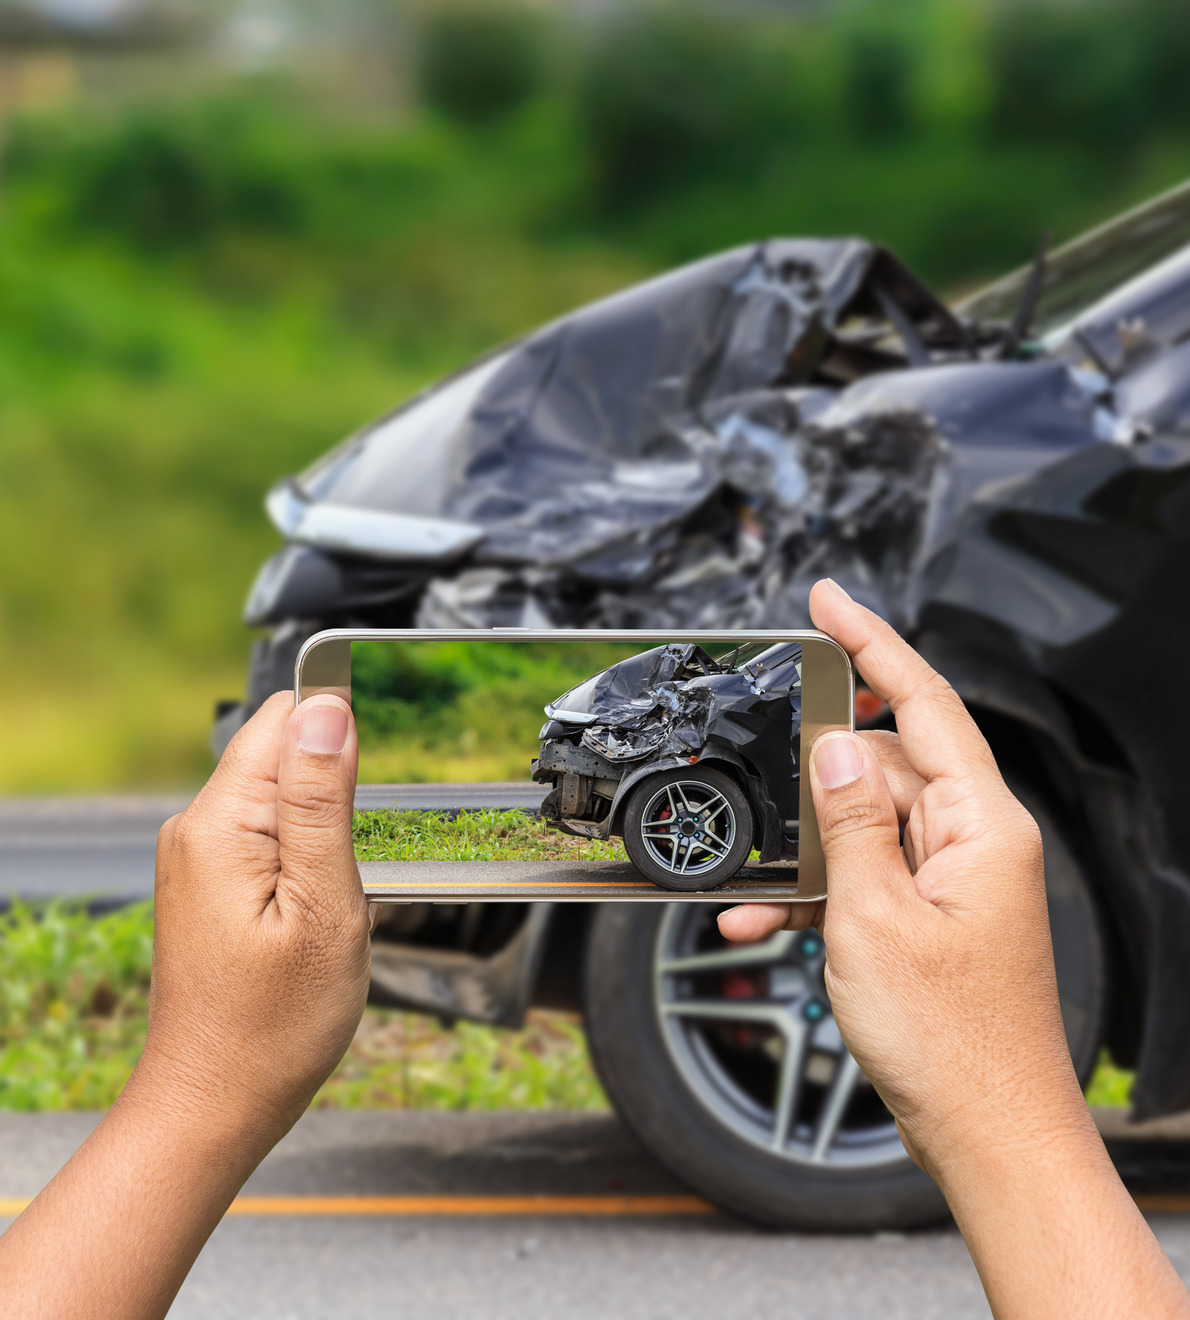 10 Things to Do After a Car Accident